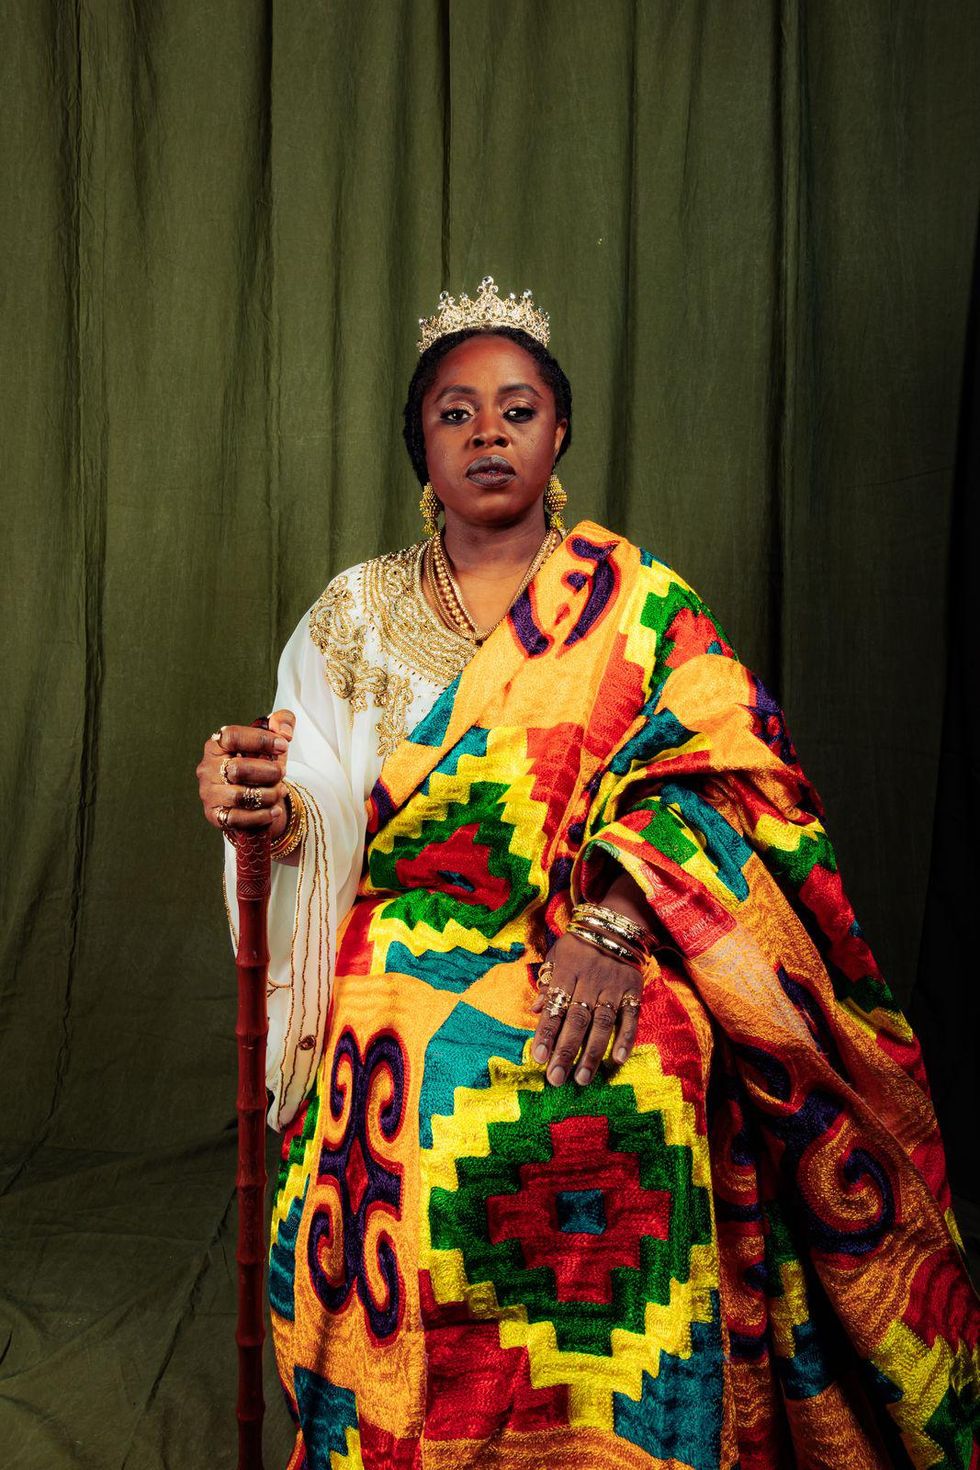 Pictured: Nigerian artist Tosinger as Queen Idia as part of her #We3Queens human art installation project